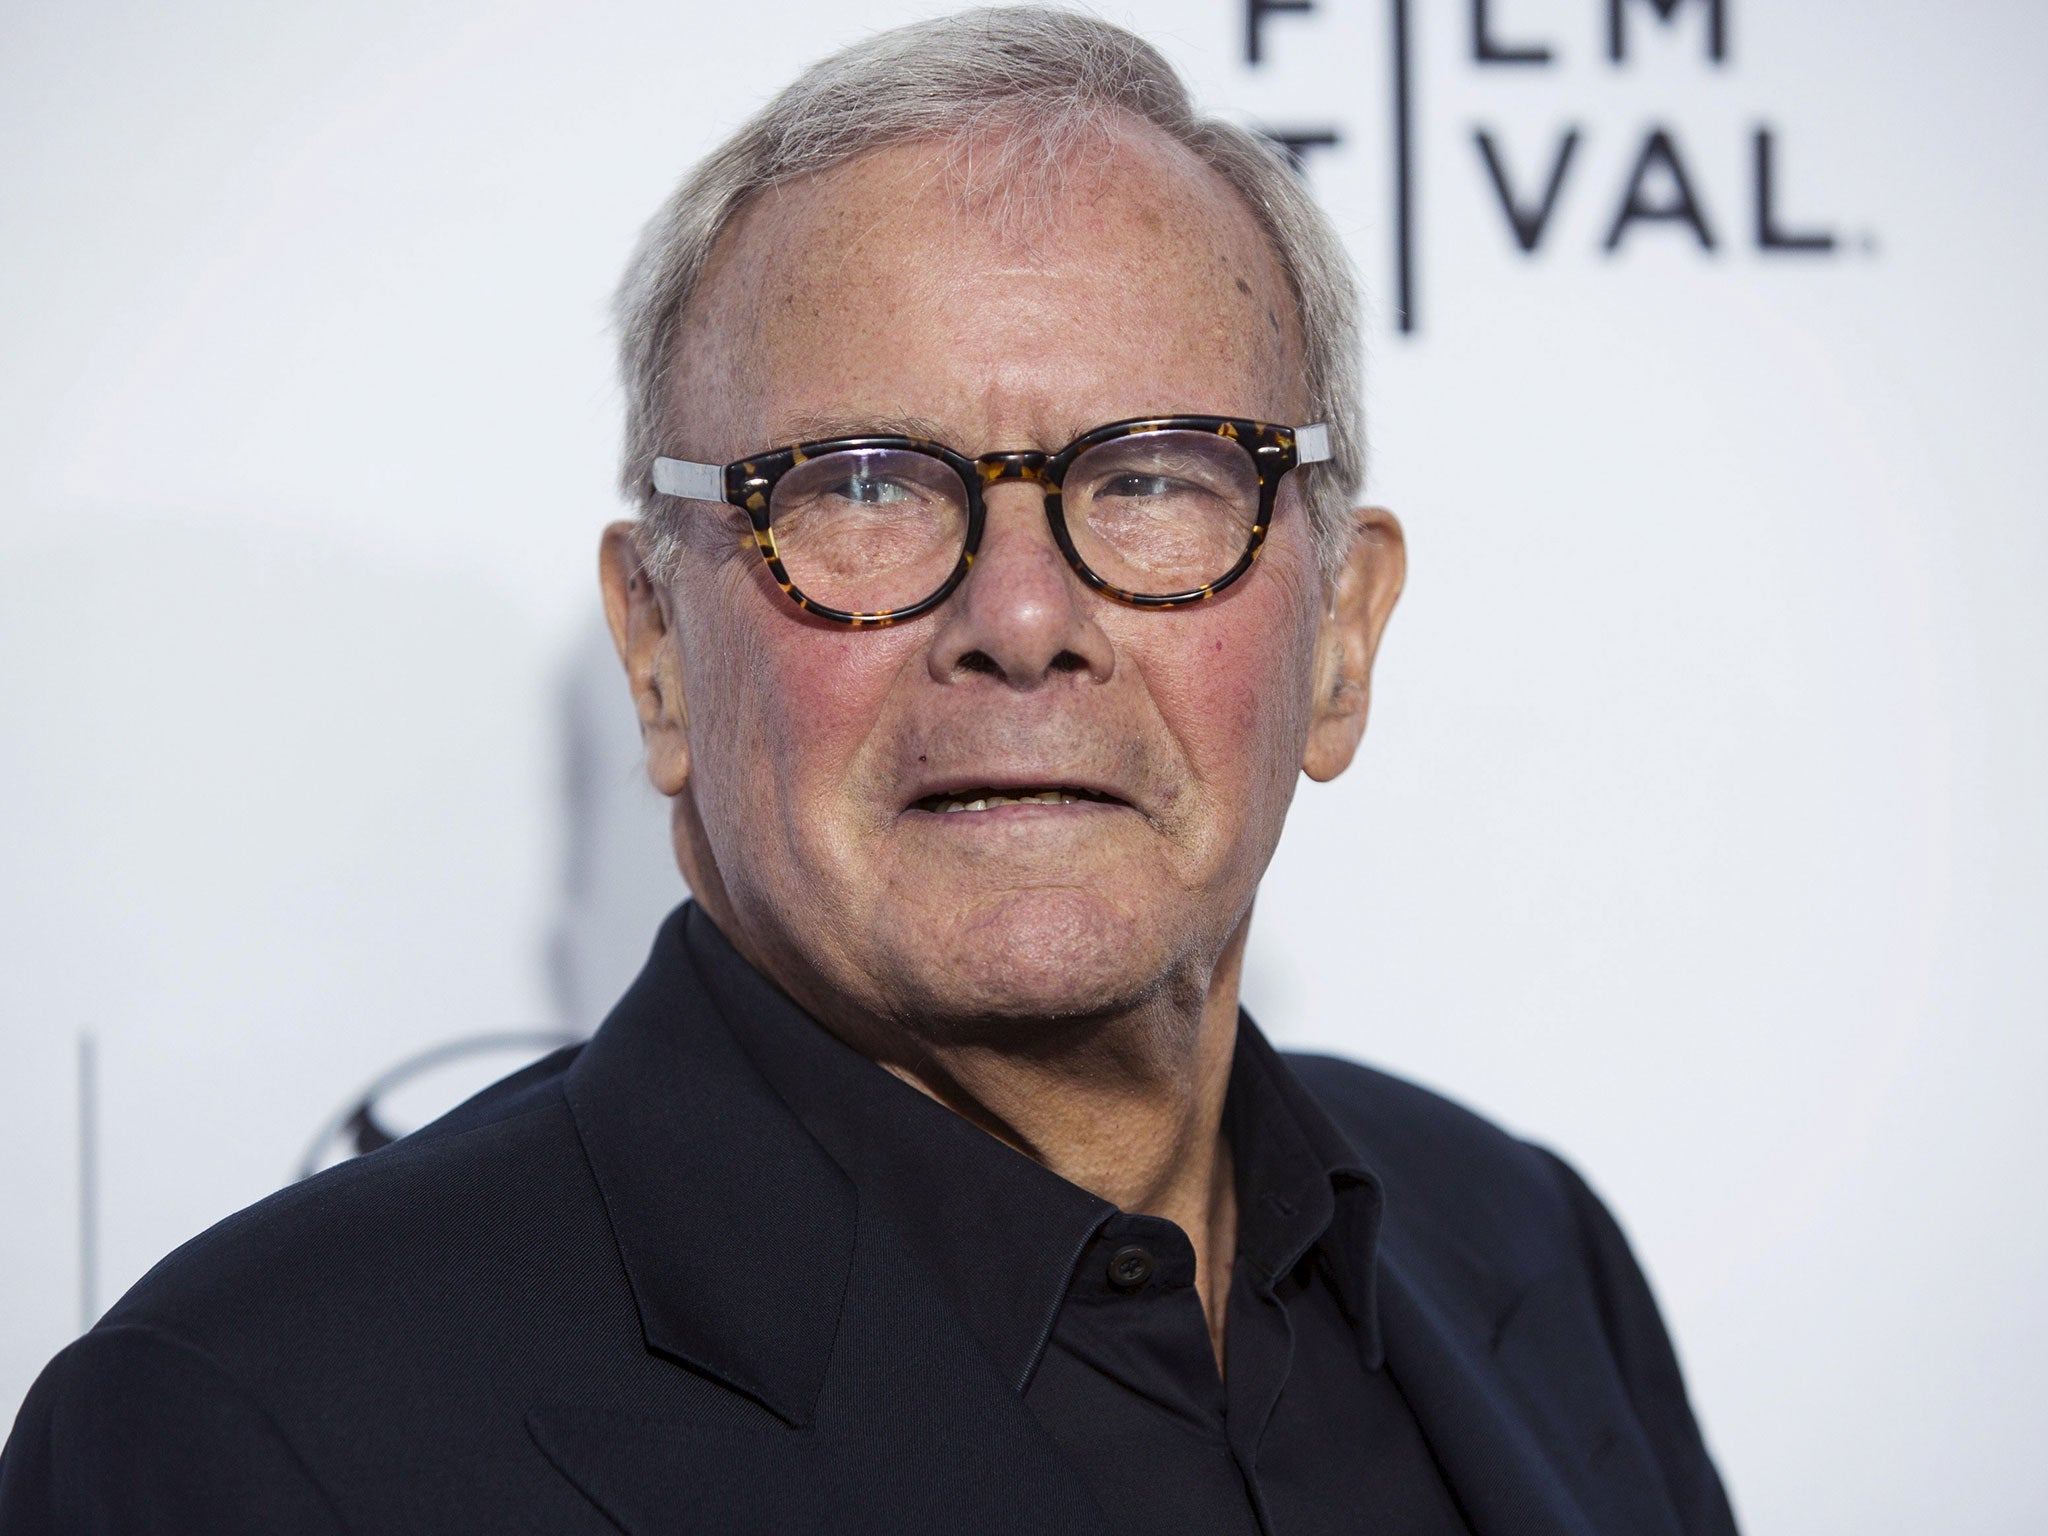 Tom Brokaw anchored 'NBC Nightly News' from 1982 to 2004 and has since served as a special correspondent